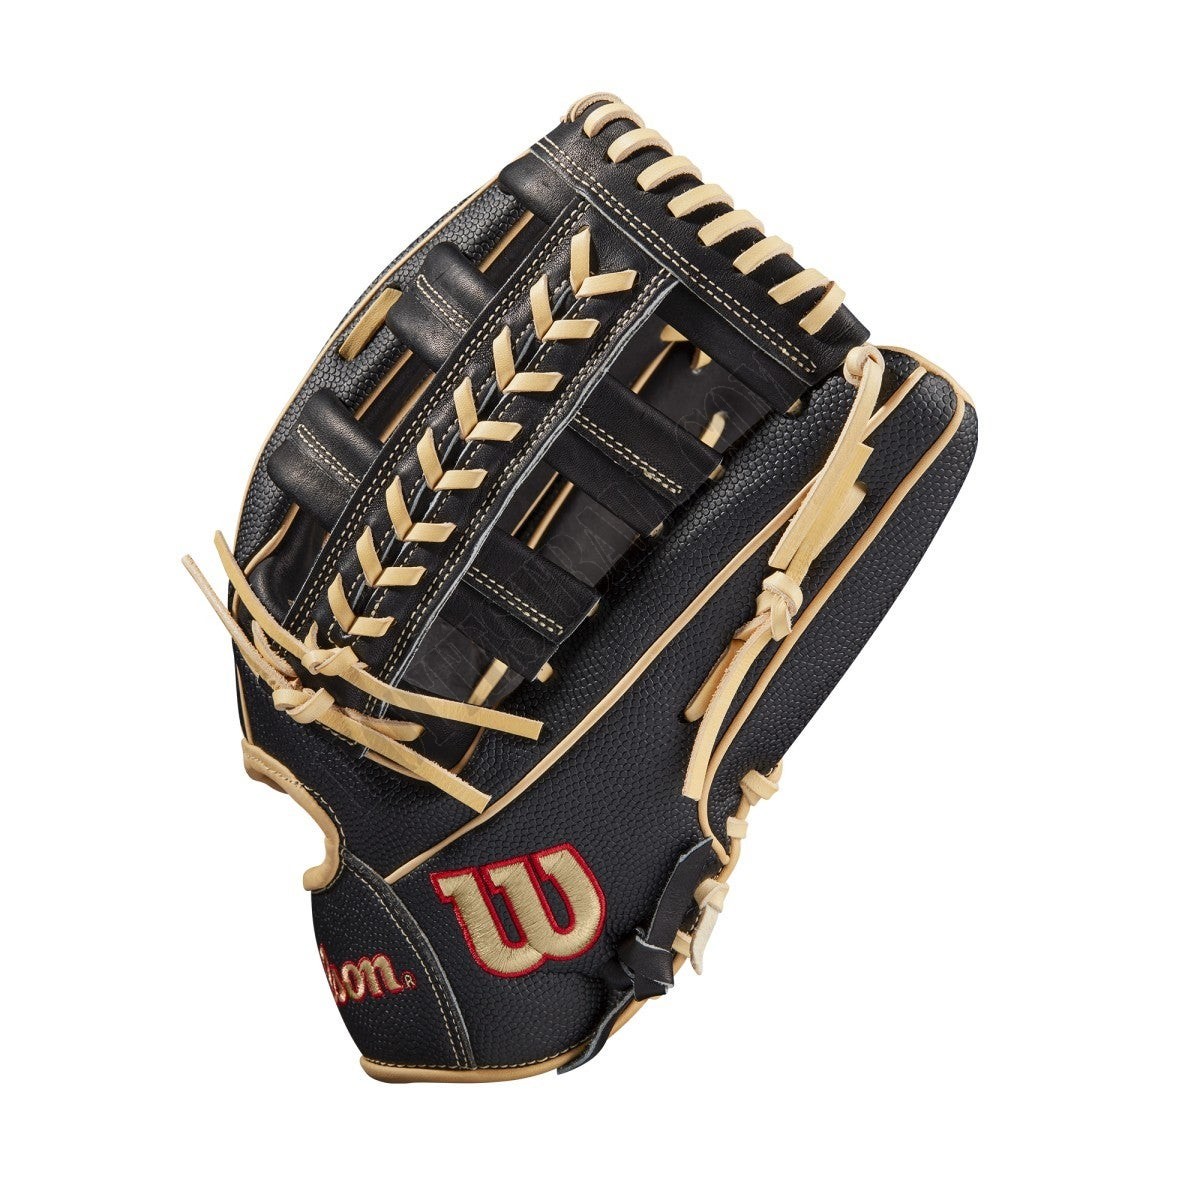 2021 A2000 1800SS 12.75" Outfield Baseball Glove ● Wilson Promotions - -3